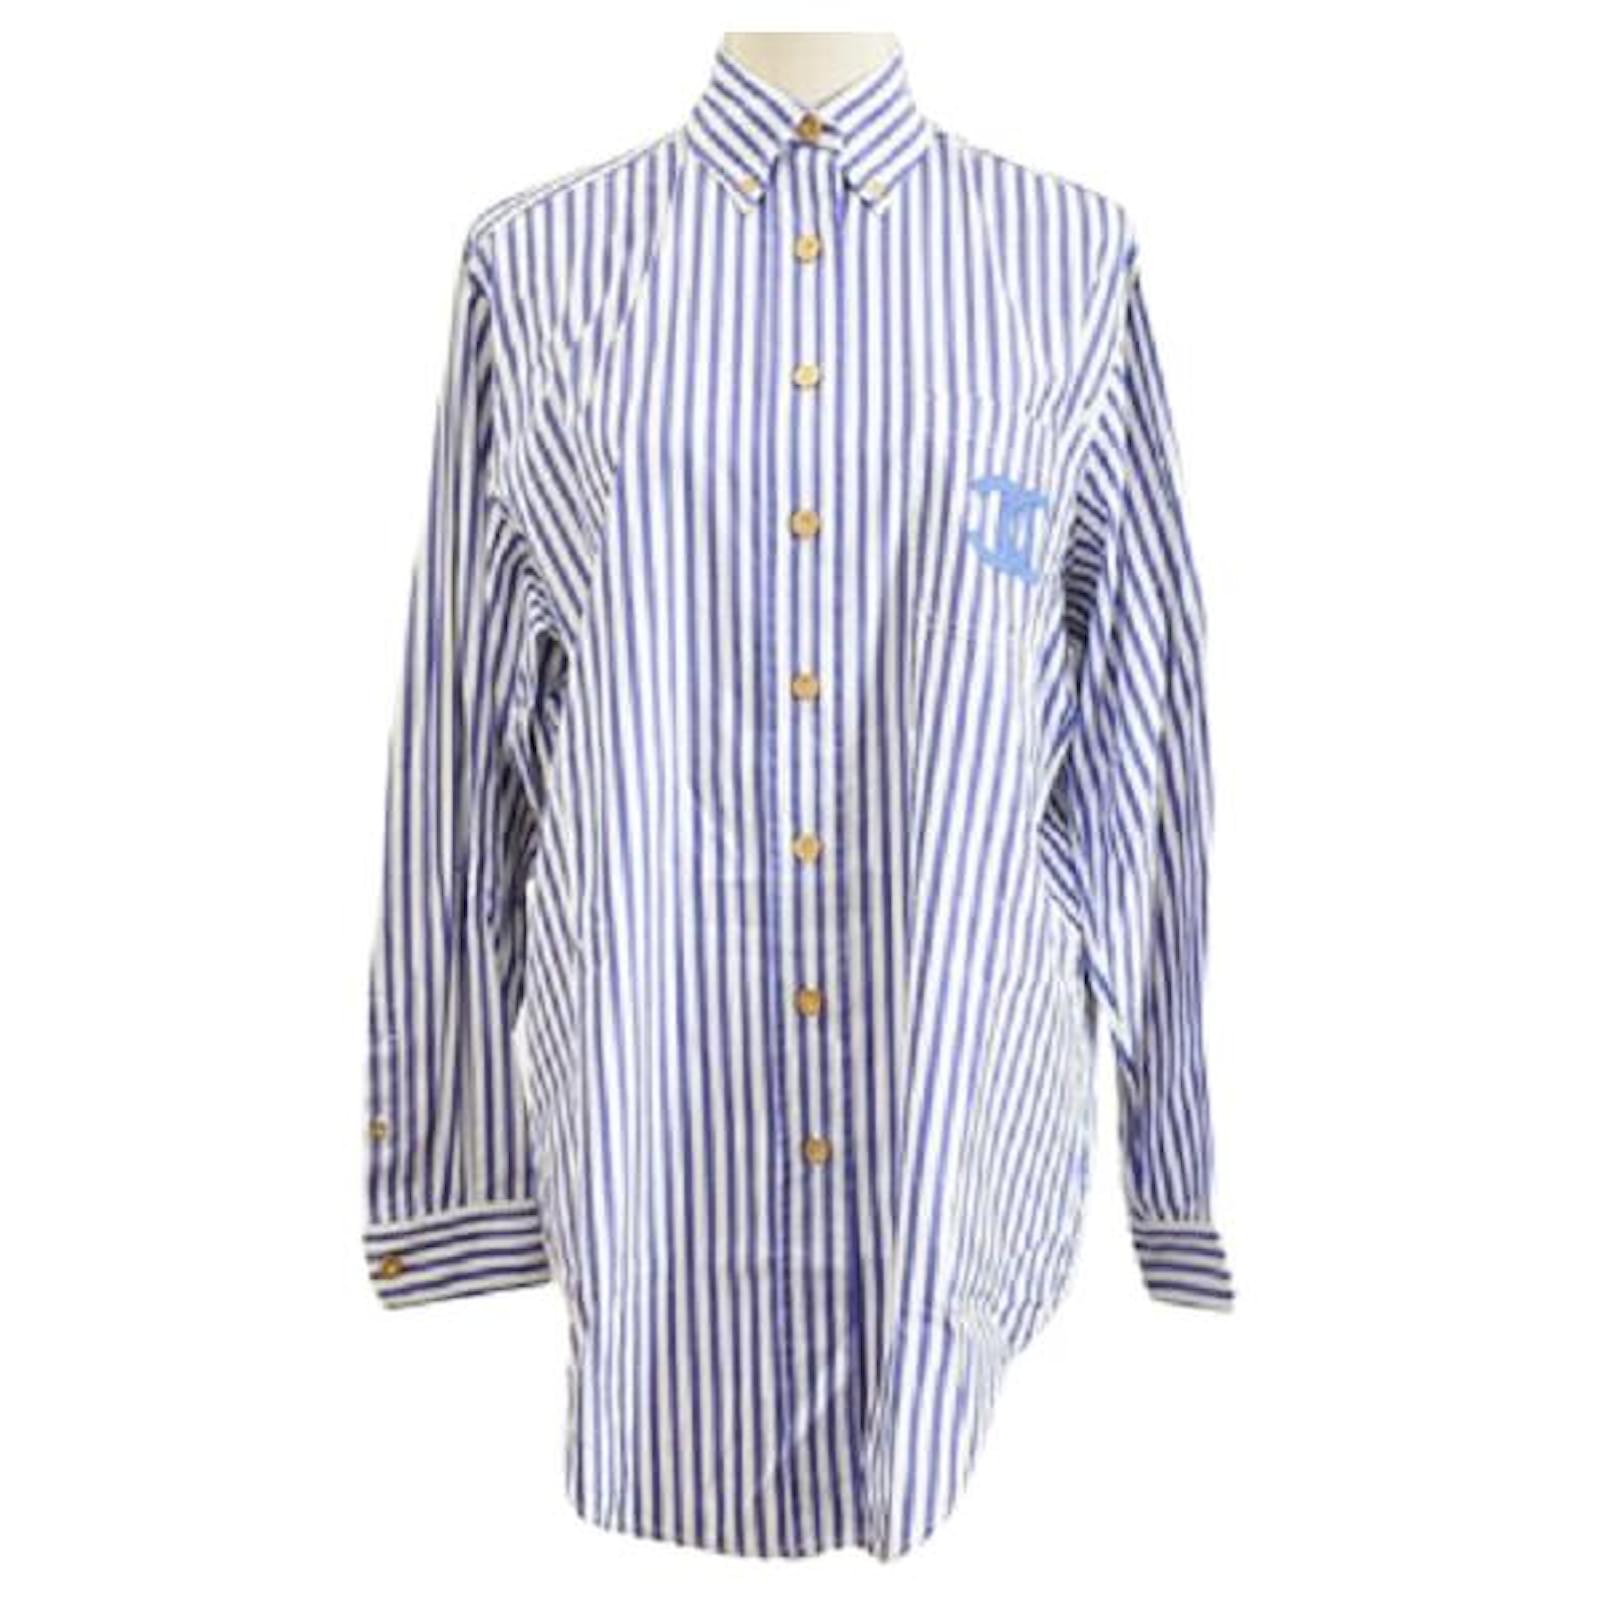 Used] Chanel Striped Shirt Pocket Coco Mark White x Blue Gold